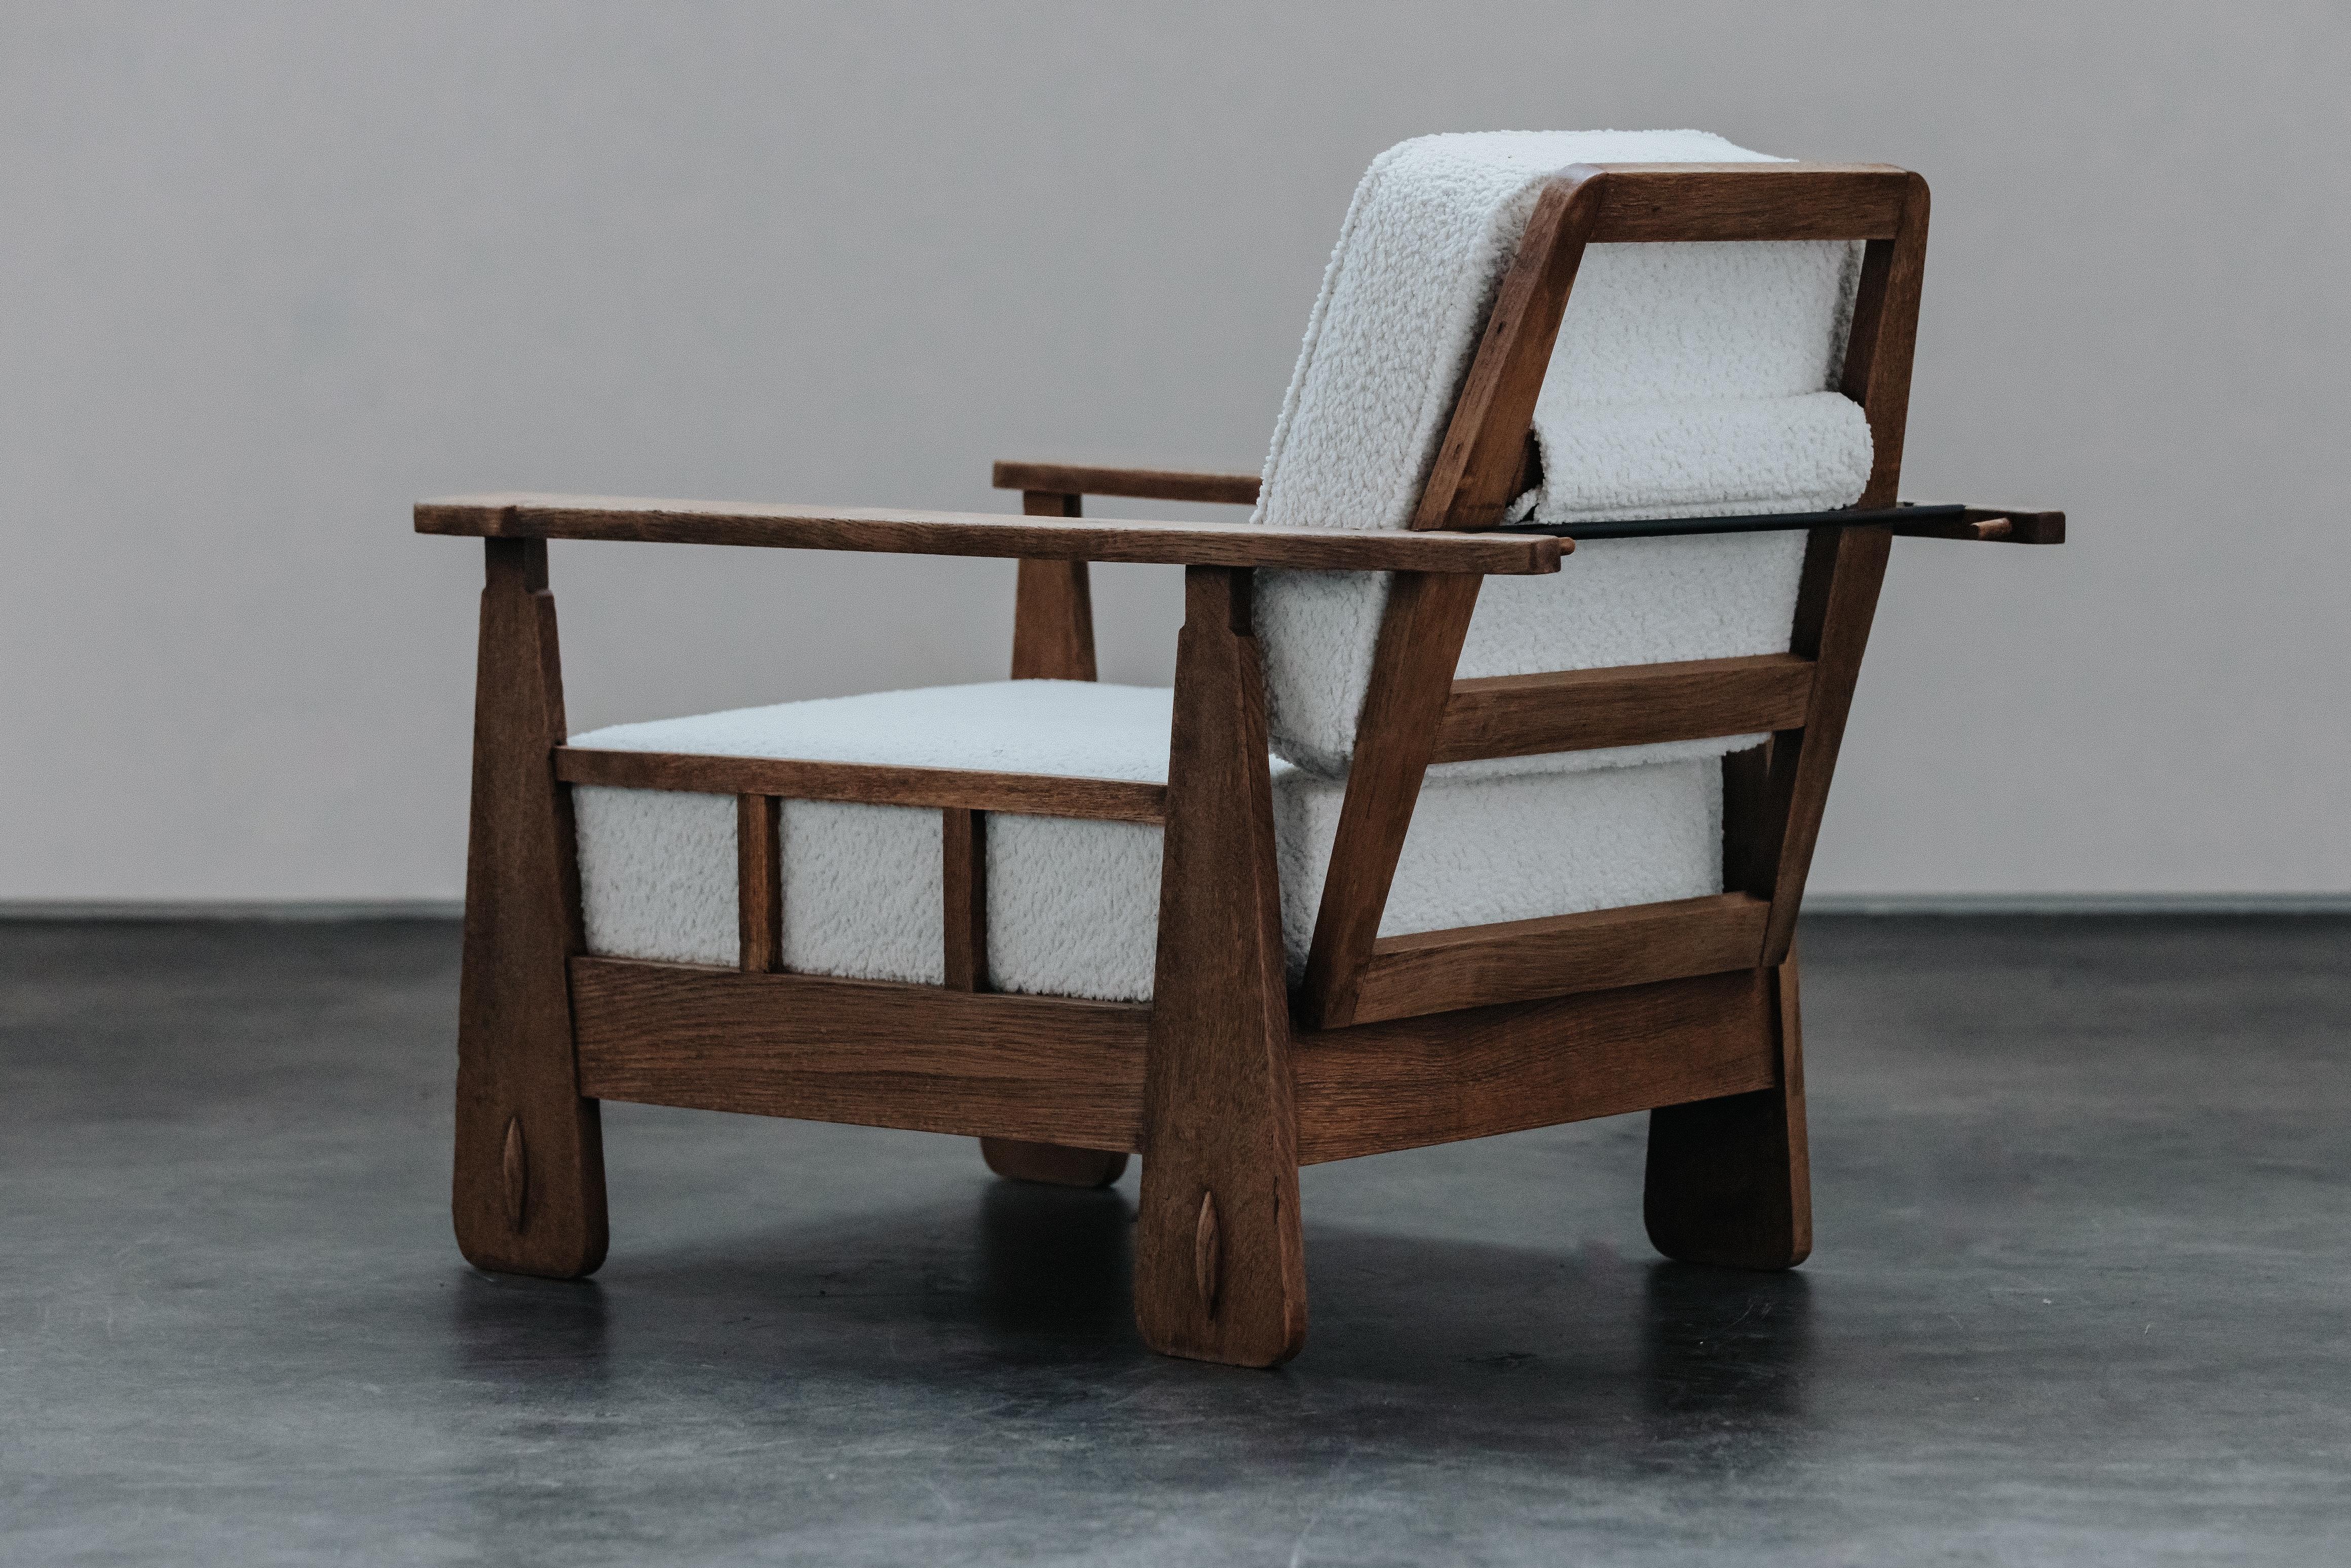 European Vintage Oak Lounge Chair From France, Circa 1970 For Sale